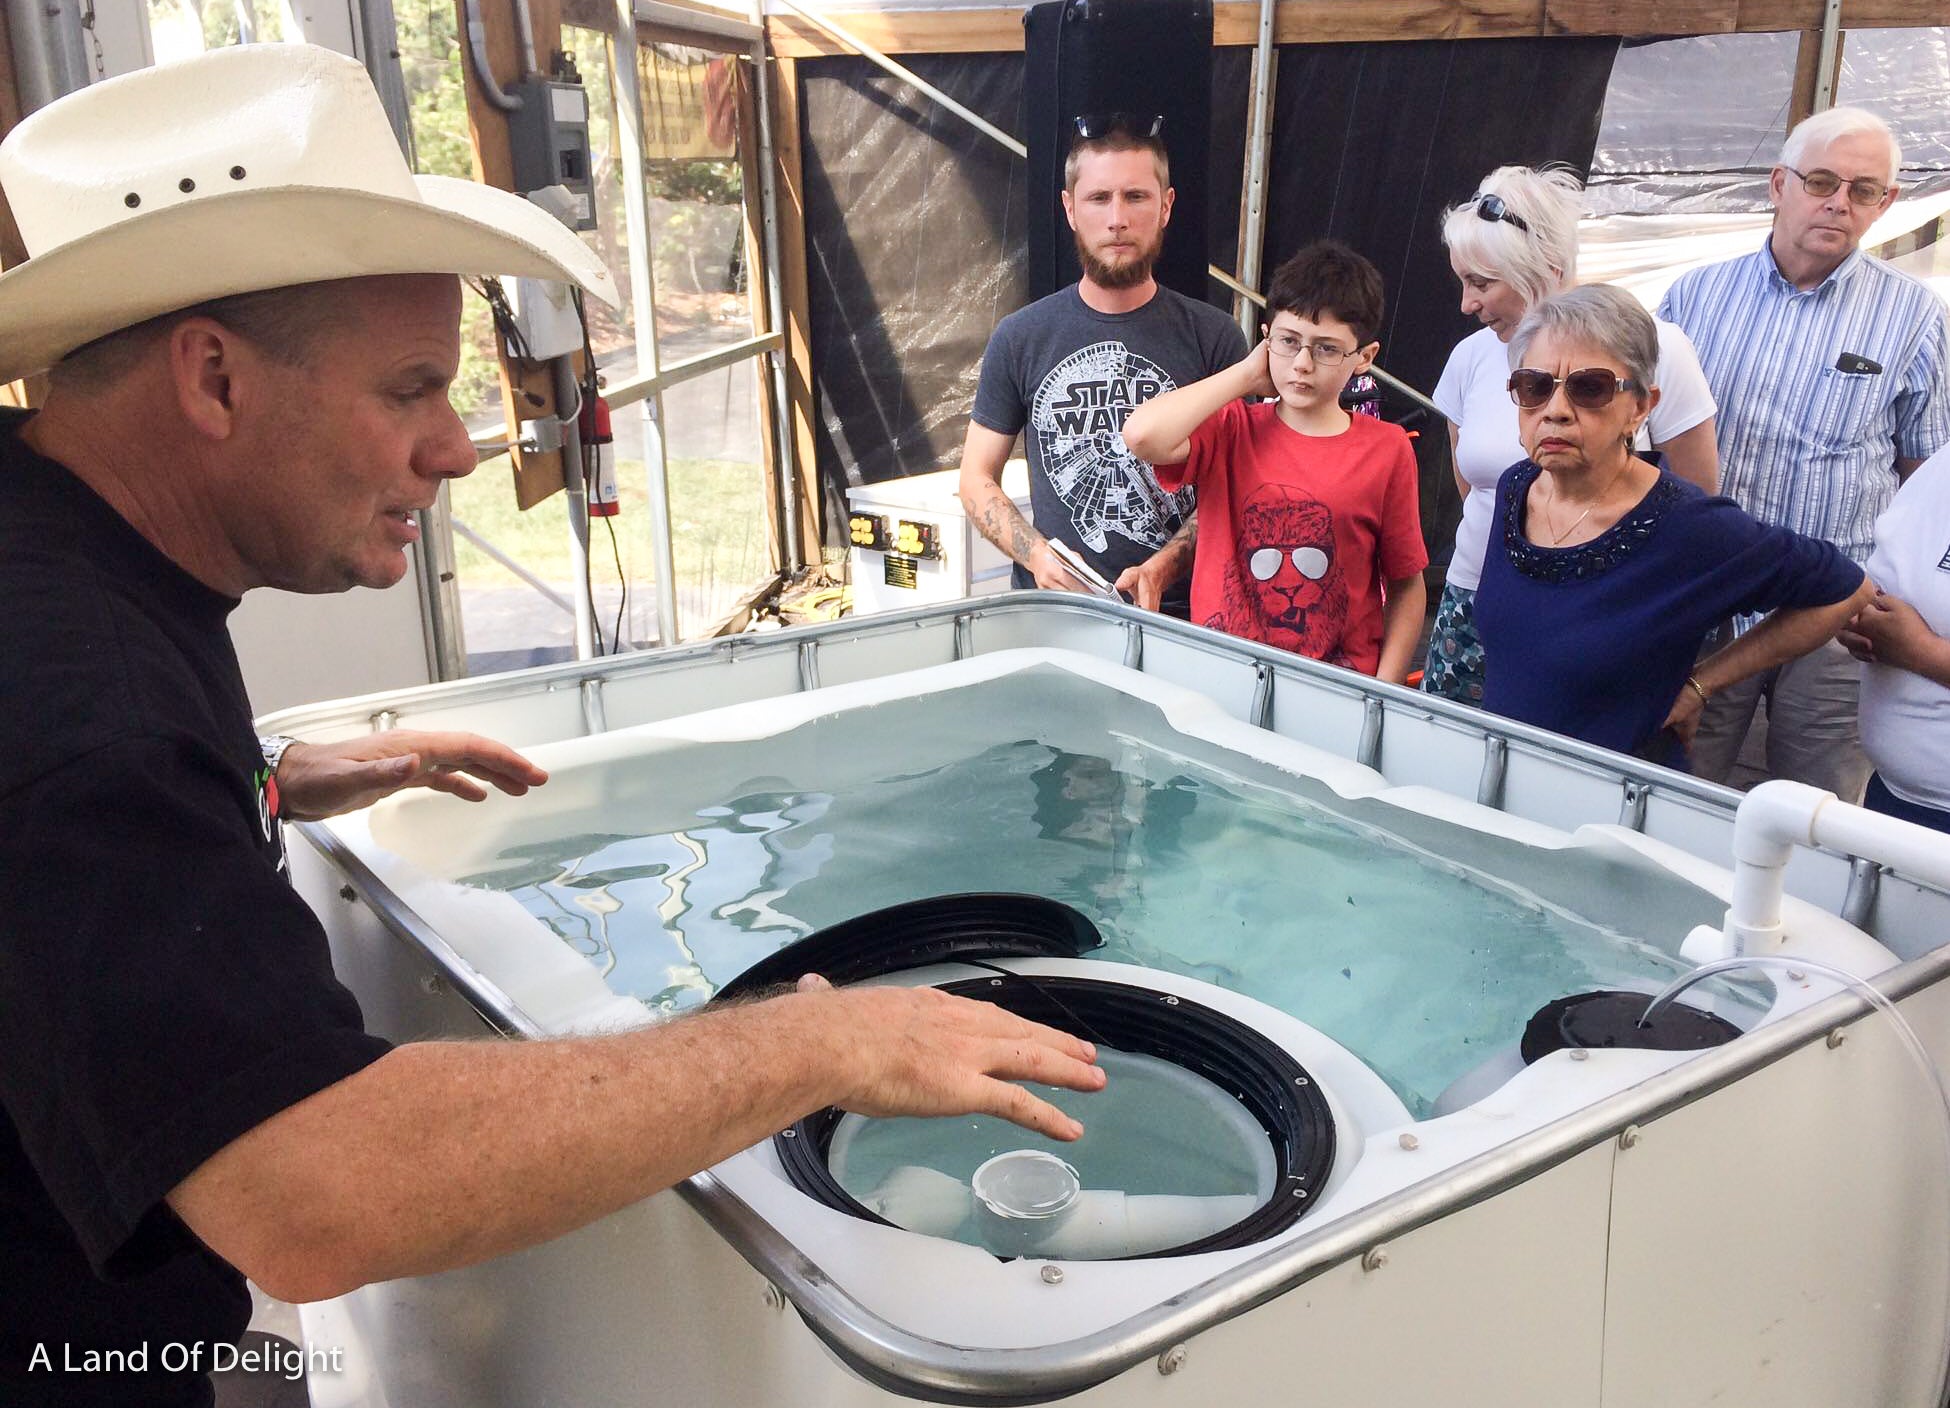 Dr. Eric Gonyon giving Aquaponics made simple class to group of people.